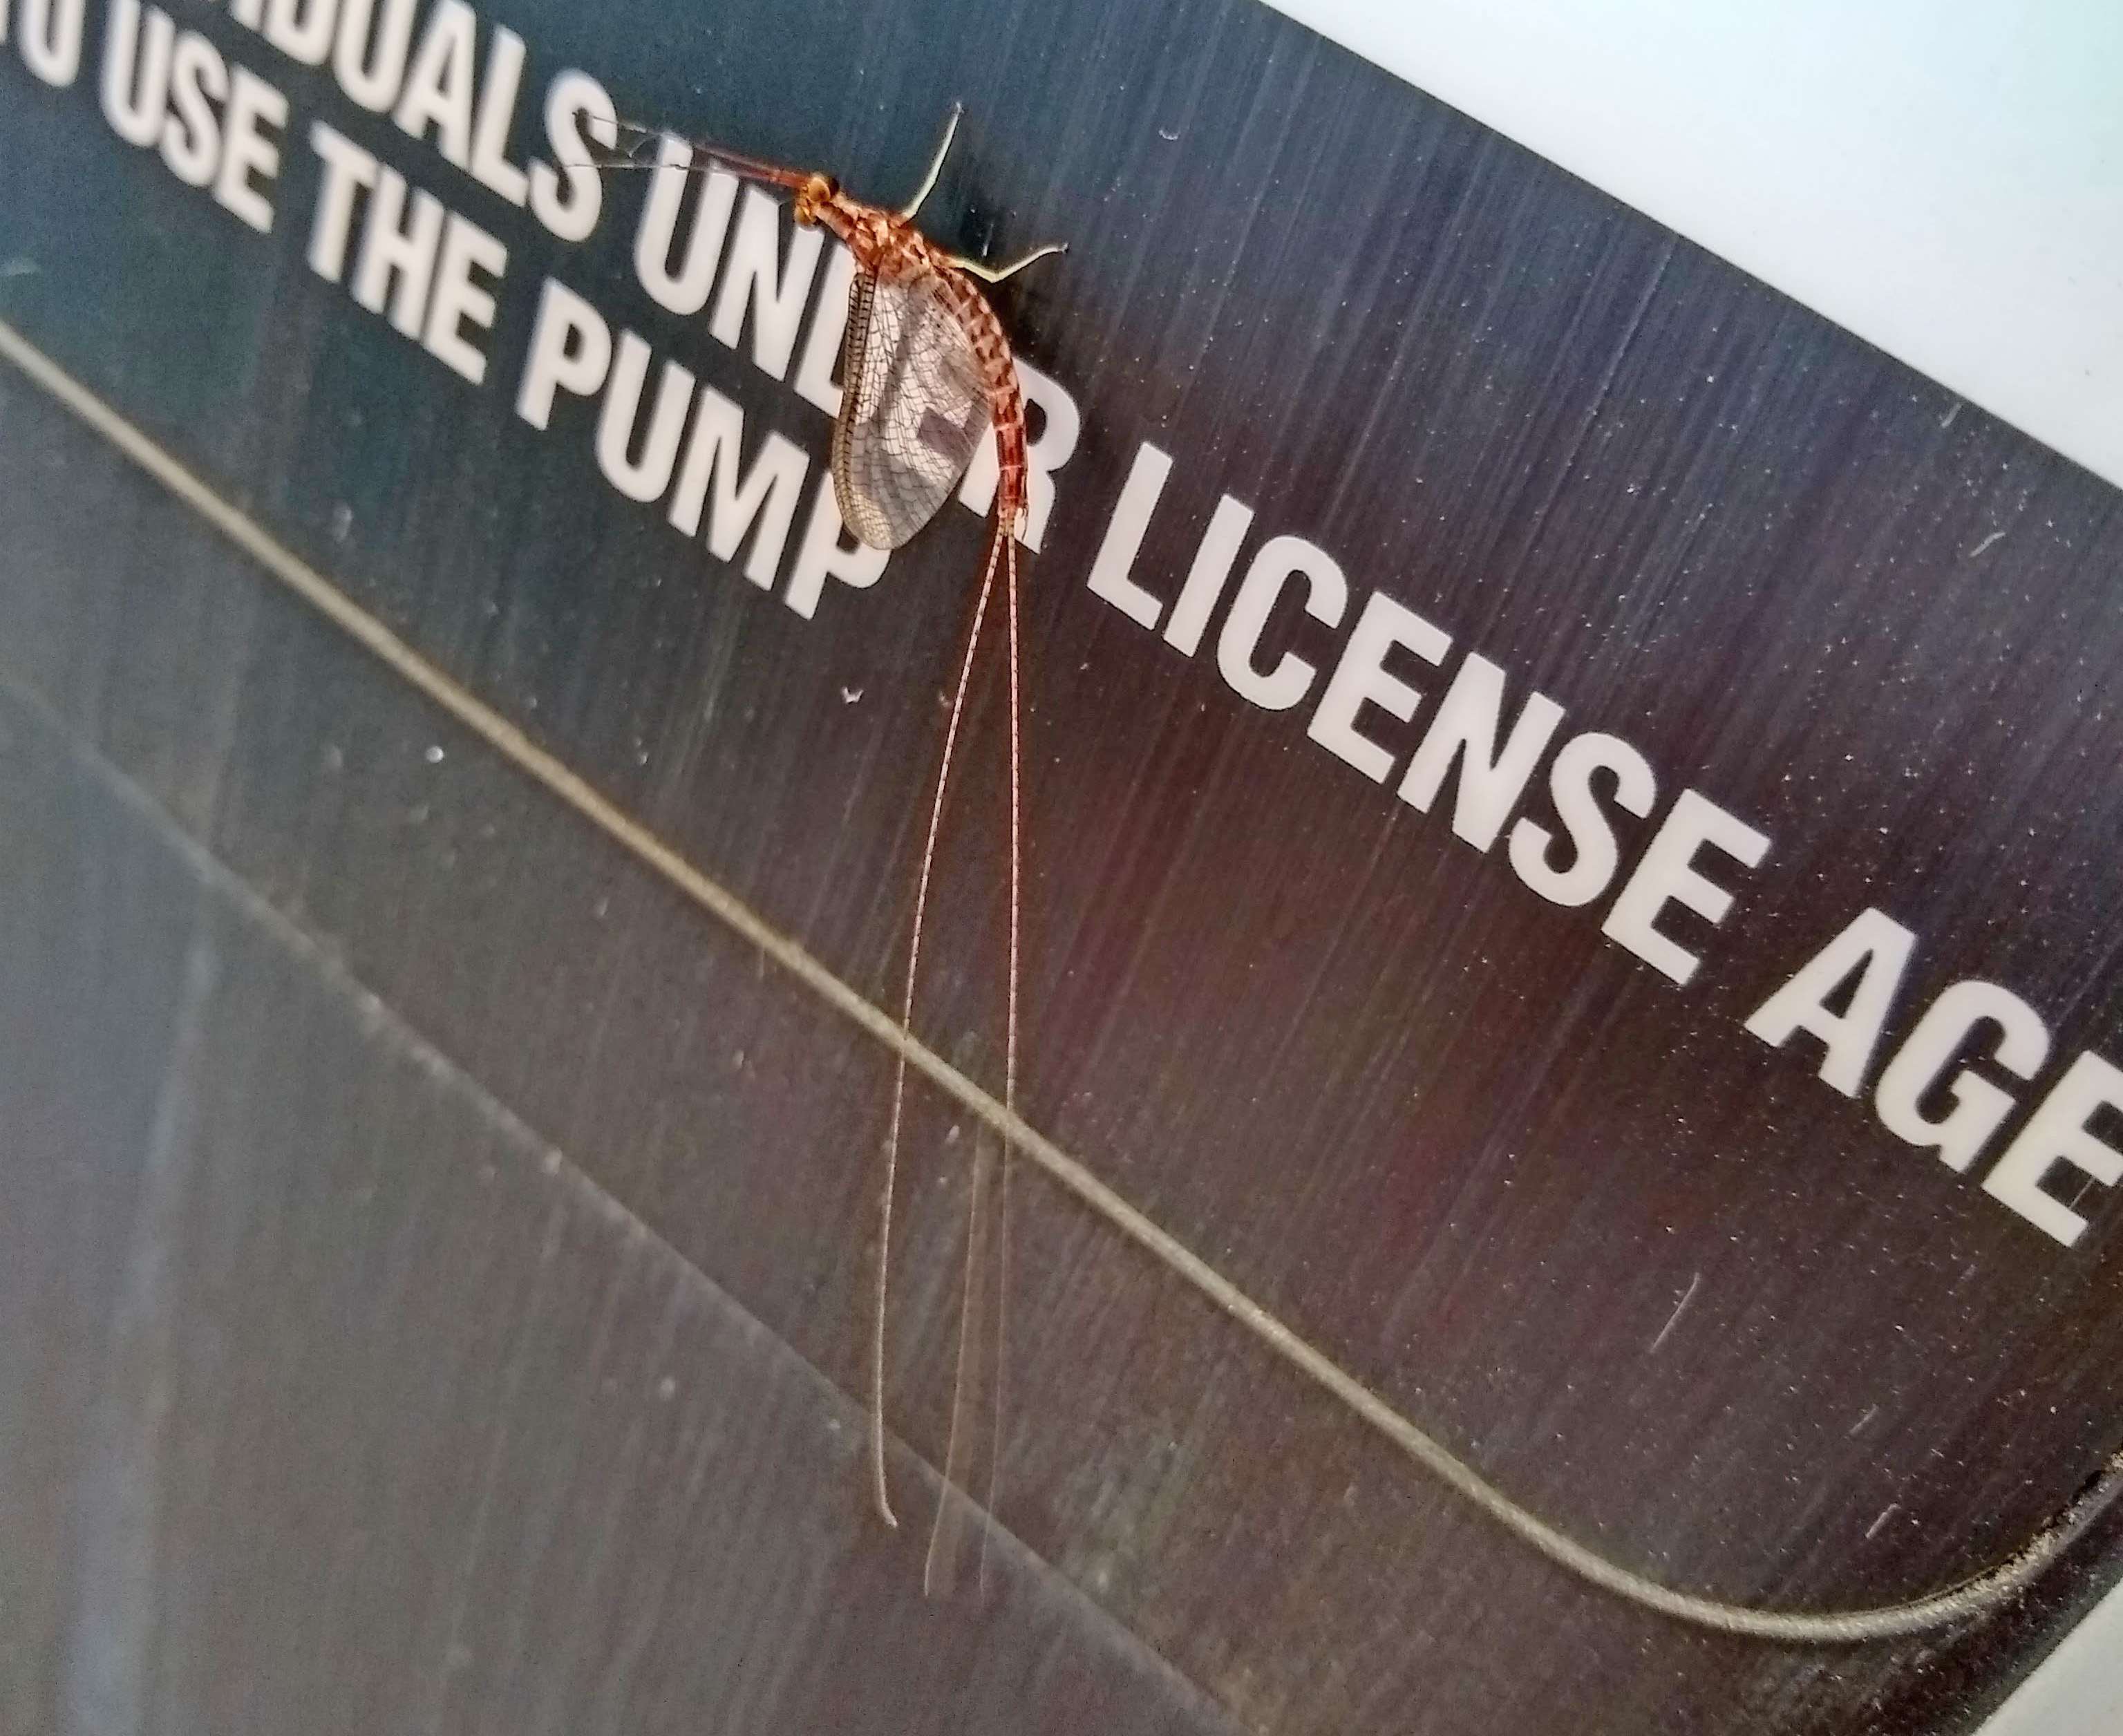 A mayfly on the side of a gas station pump 